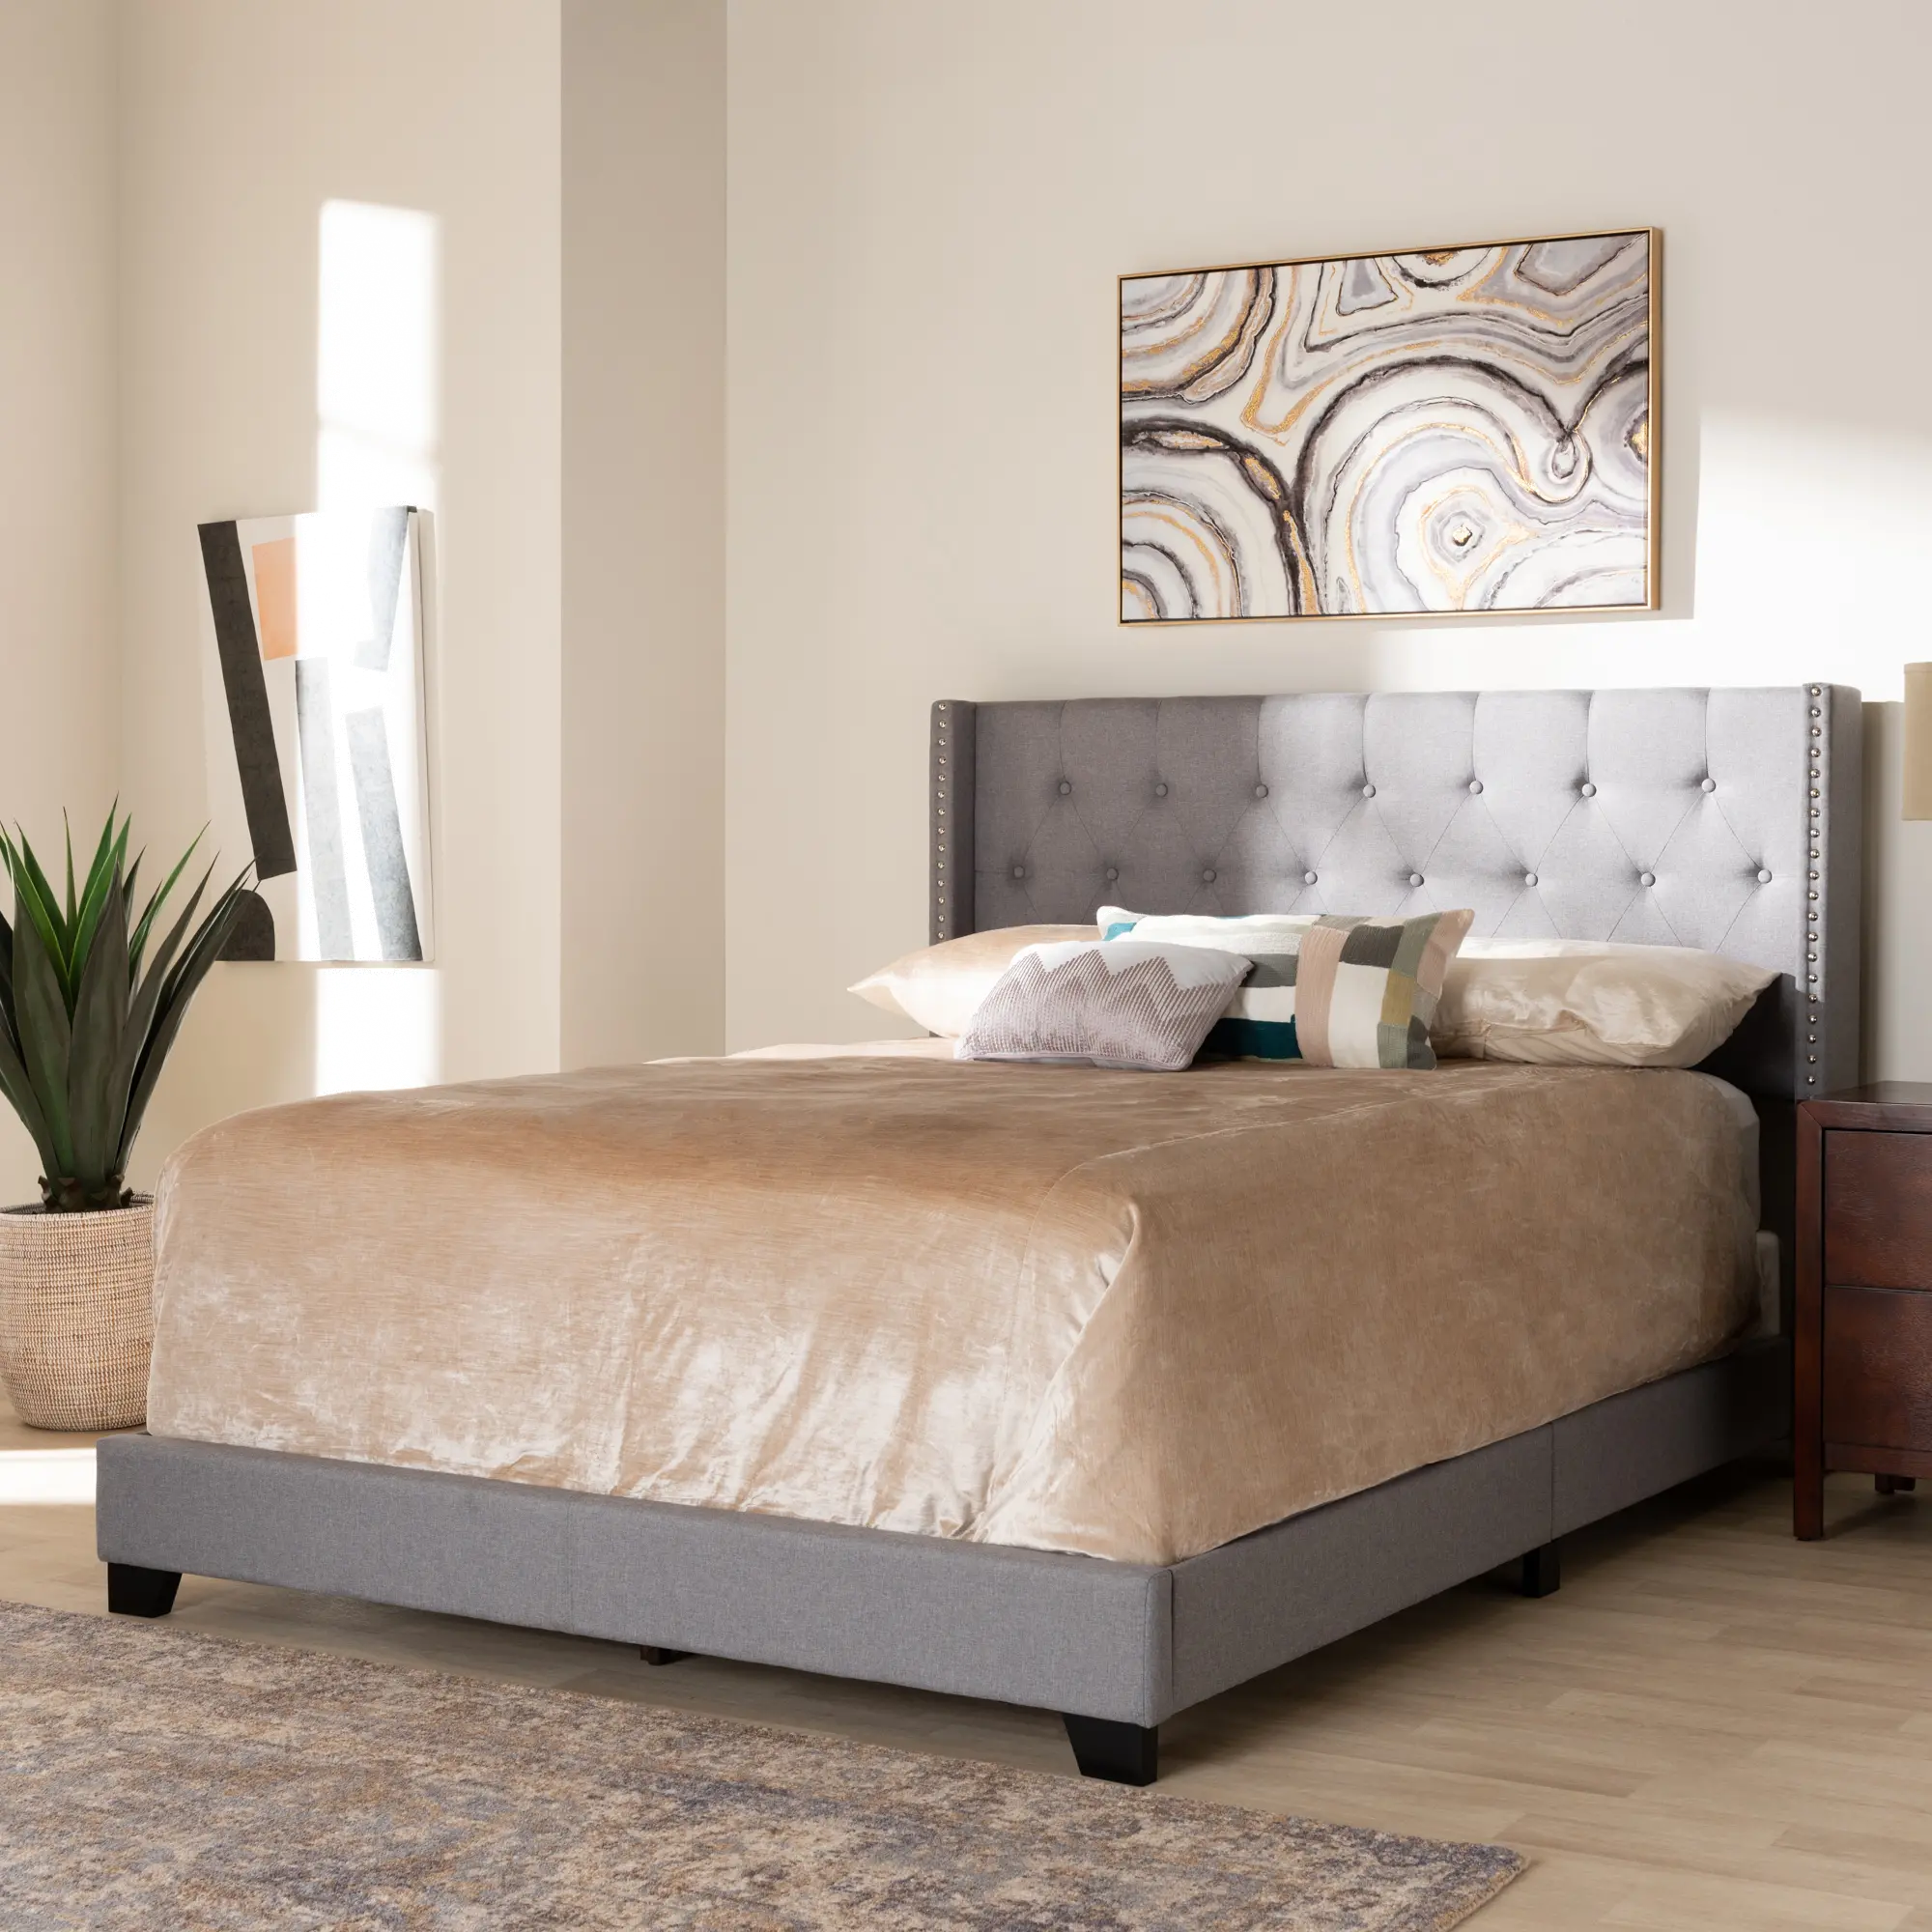 Contemporary Light Gray Upholstered Queen Bed - Westley